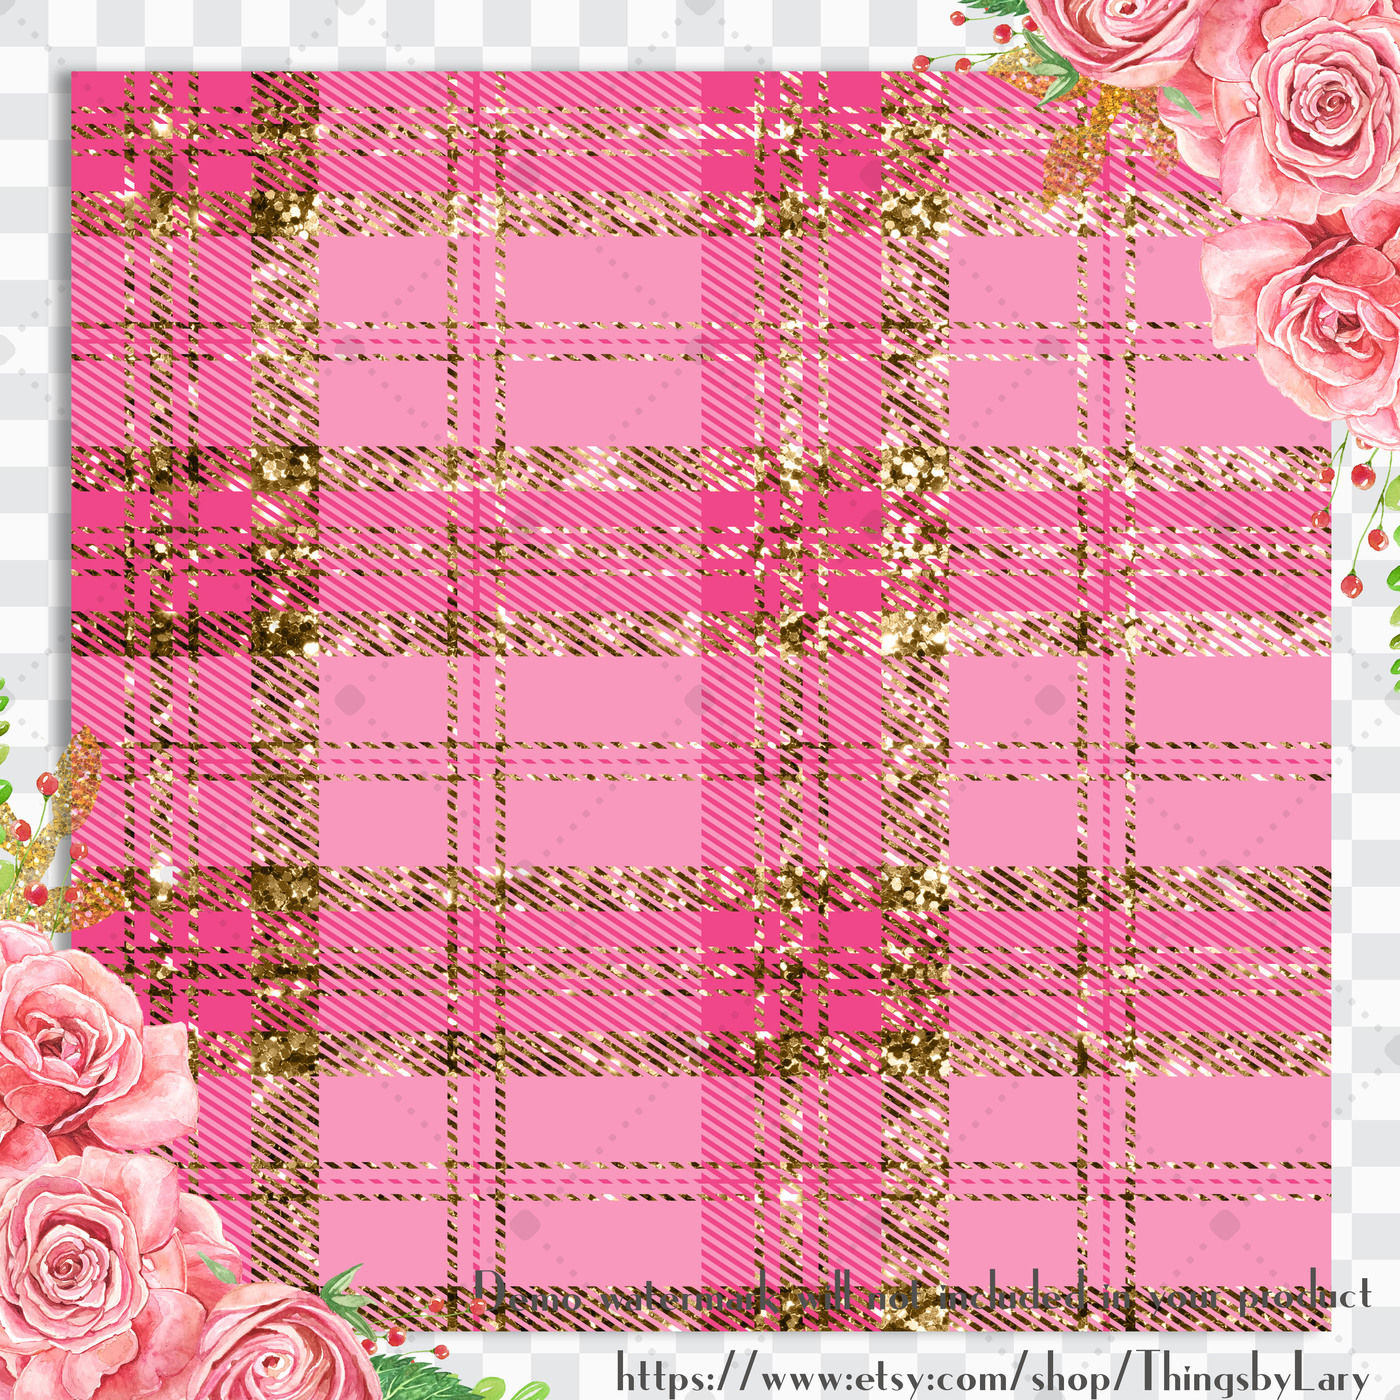 Pink & Burgundy Jagged Edge Plaid Wrapping Paper